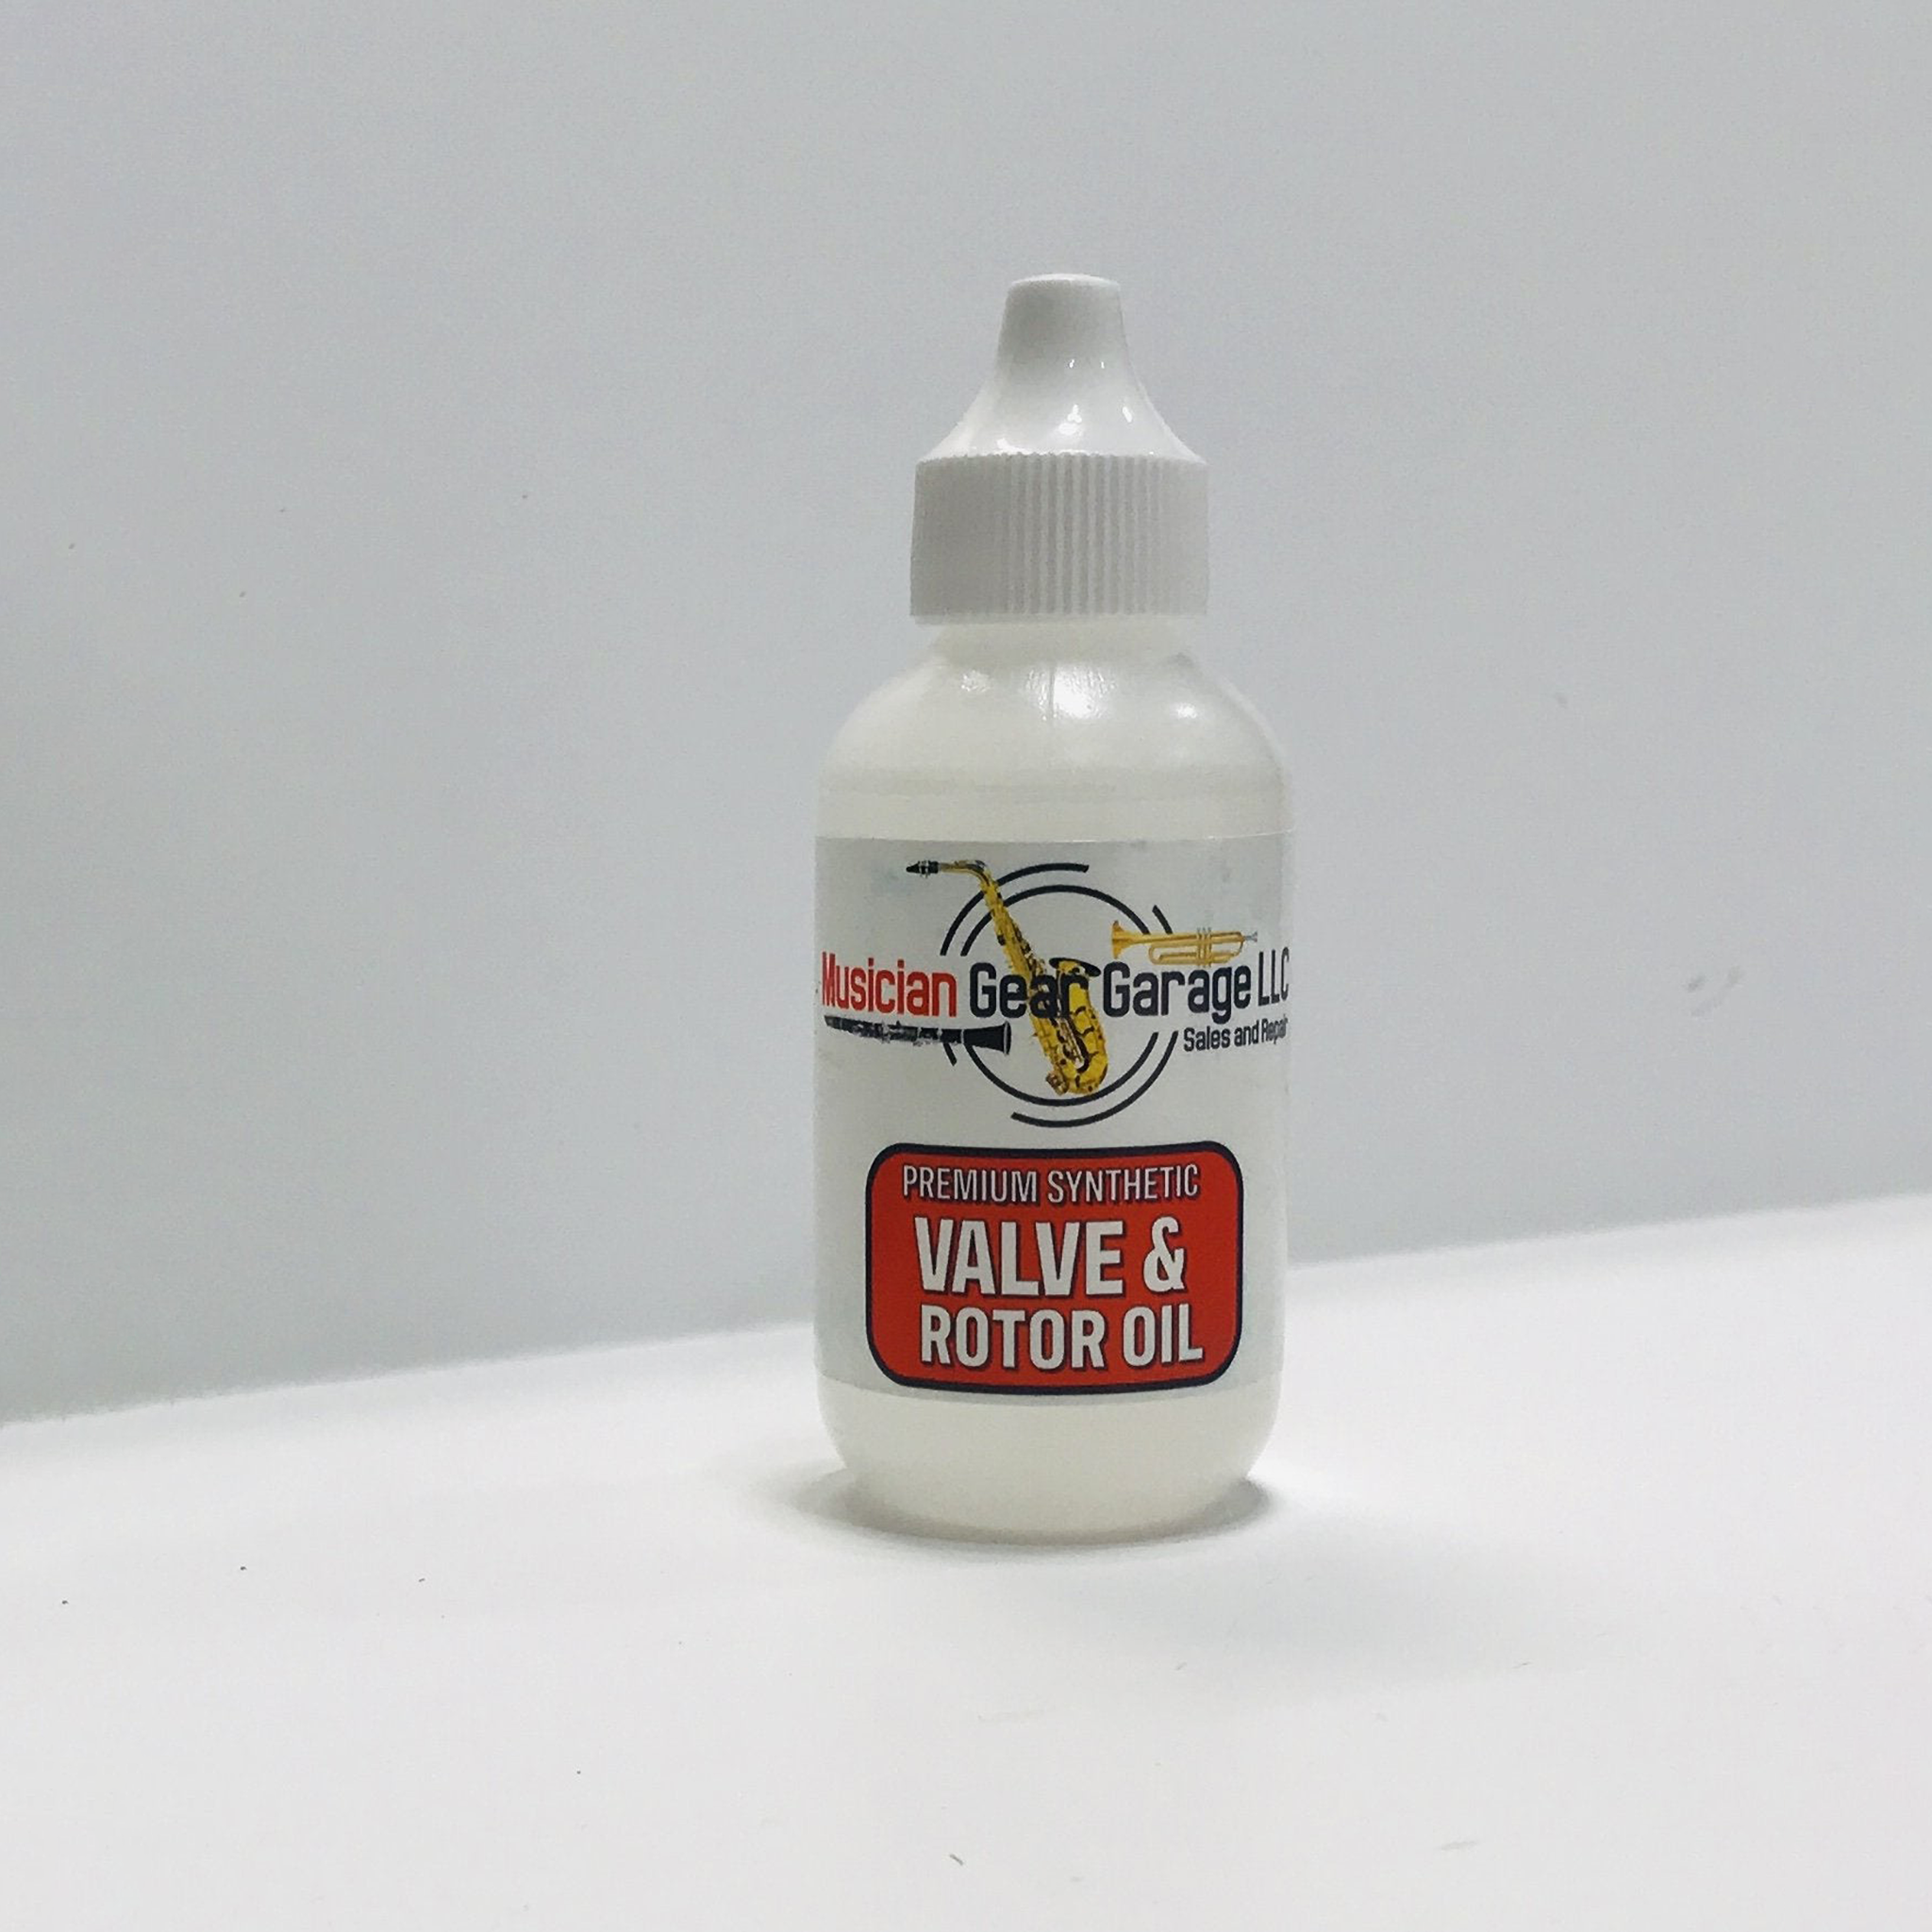 Trumpet Lubricants: Valve Oil, Slide Grease, and General